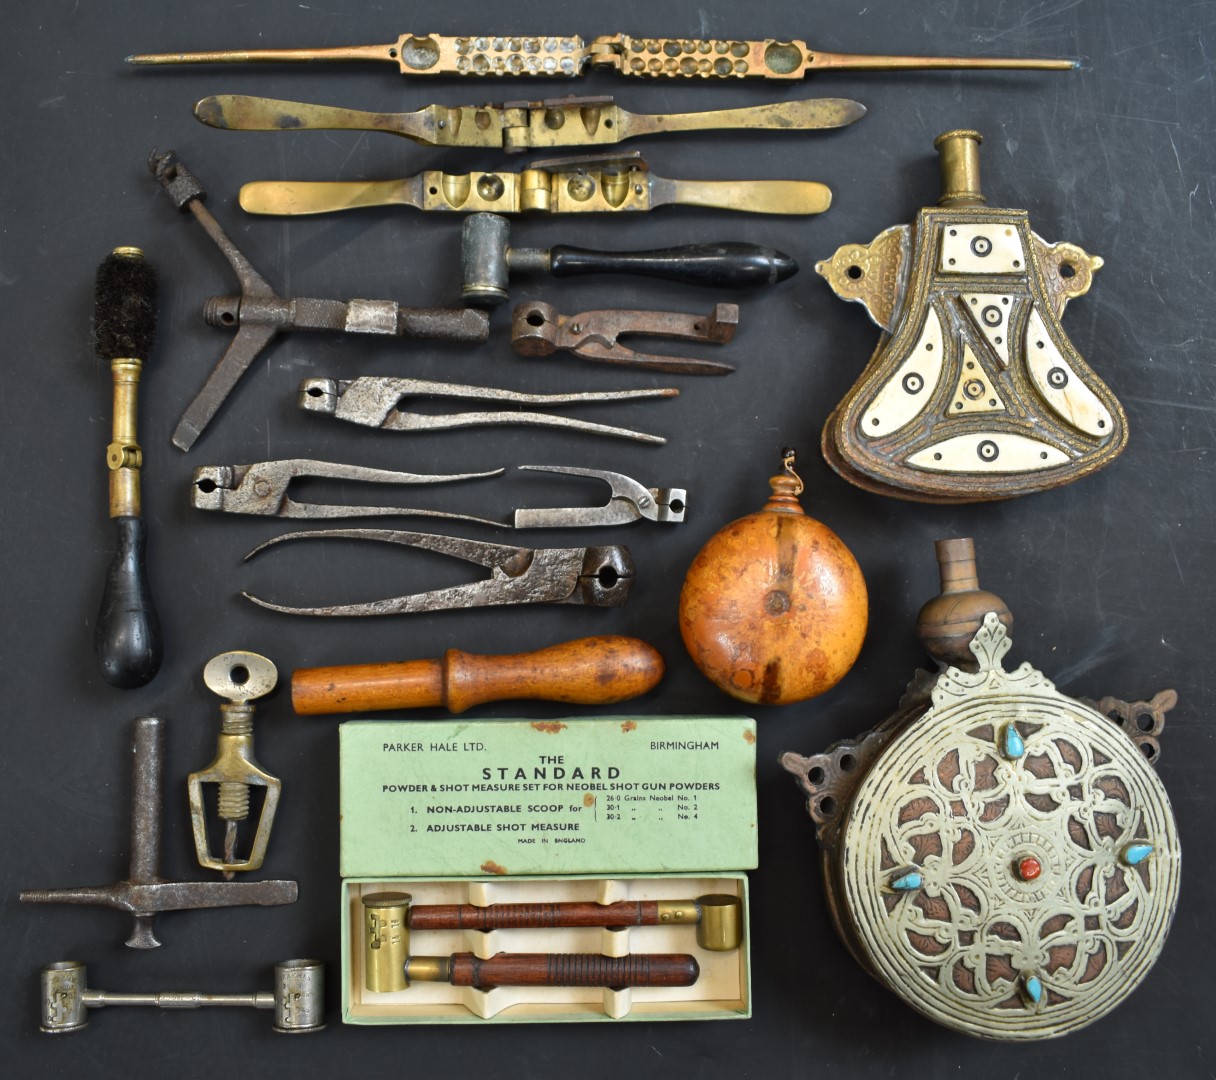 A collection of shooting related items including a pair of Parker-Hale powder measures in original